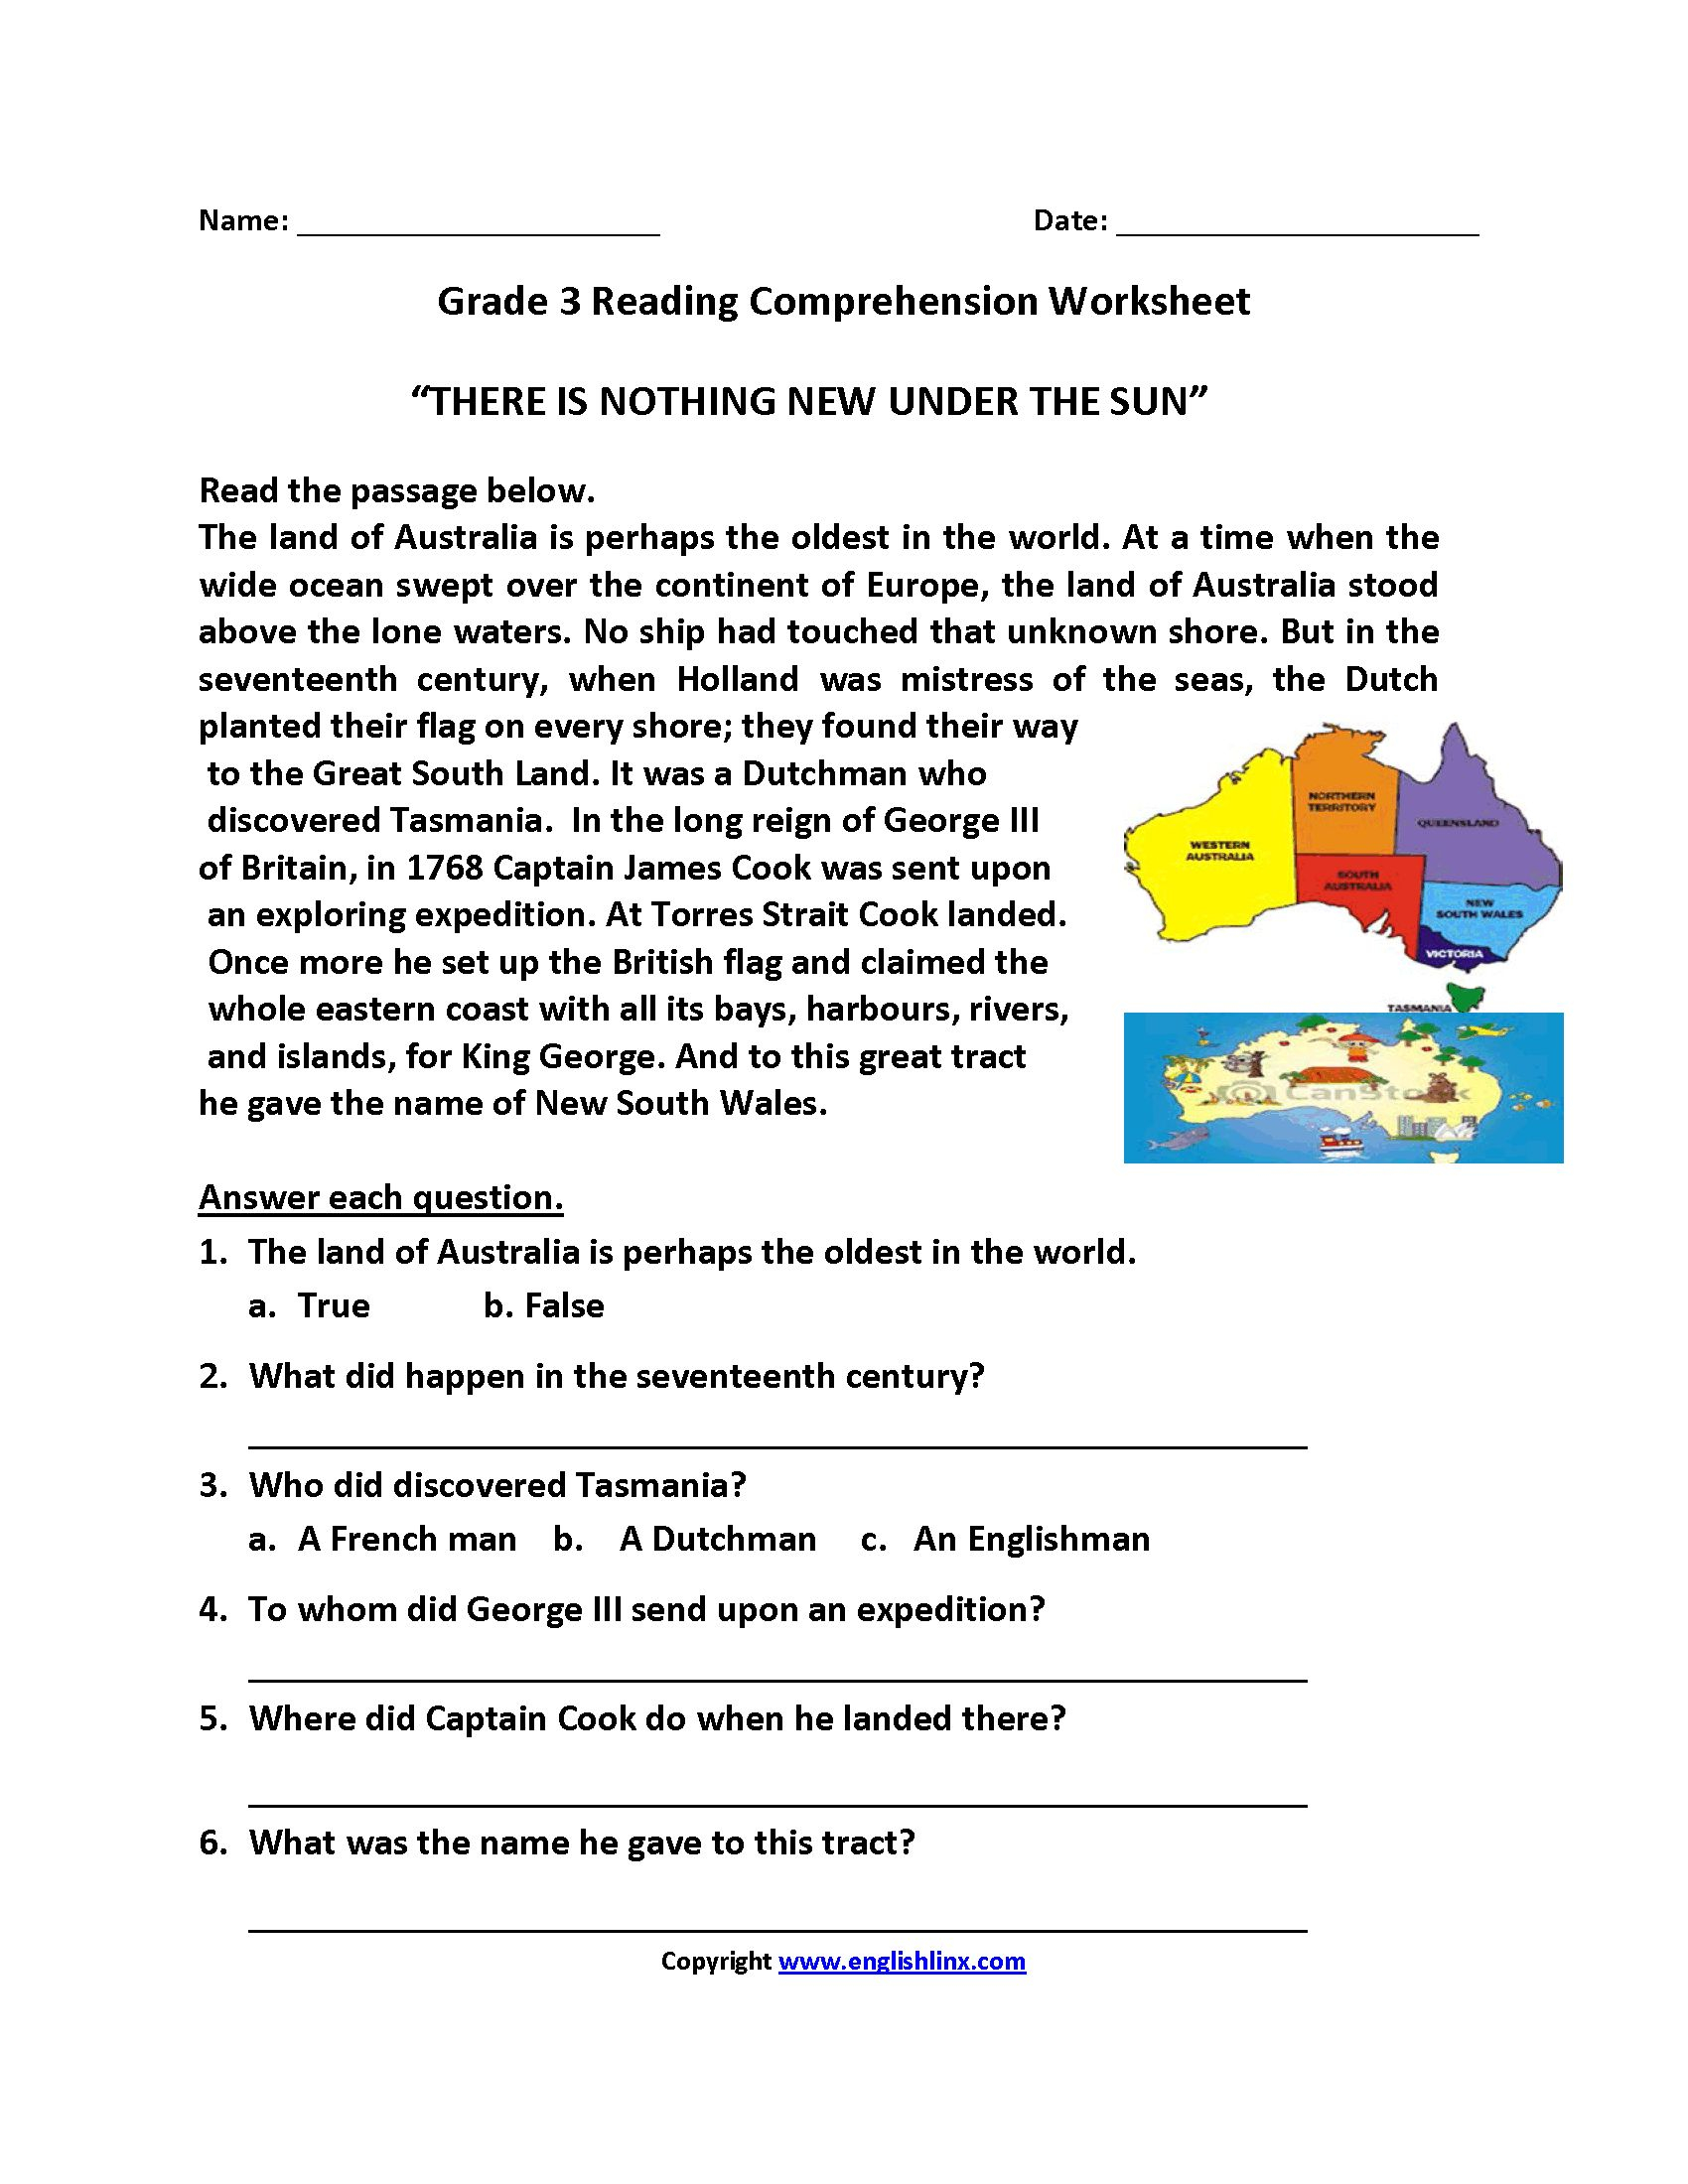 3Rd Grade Reading Comprehension Worksheets Multiple Choice Pdf Db 